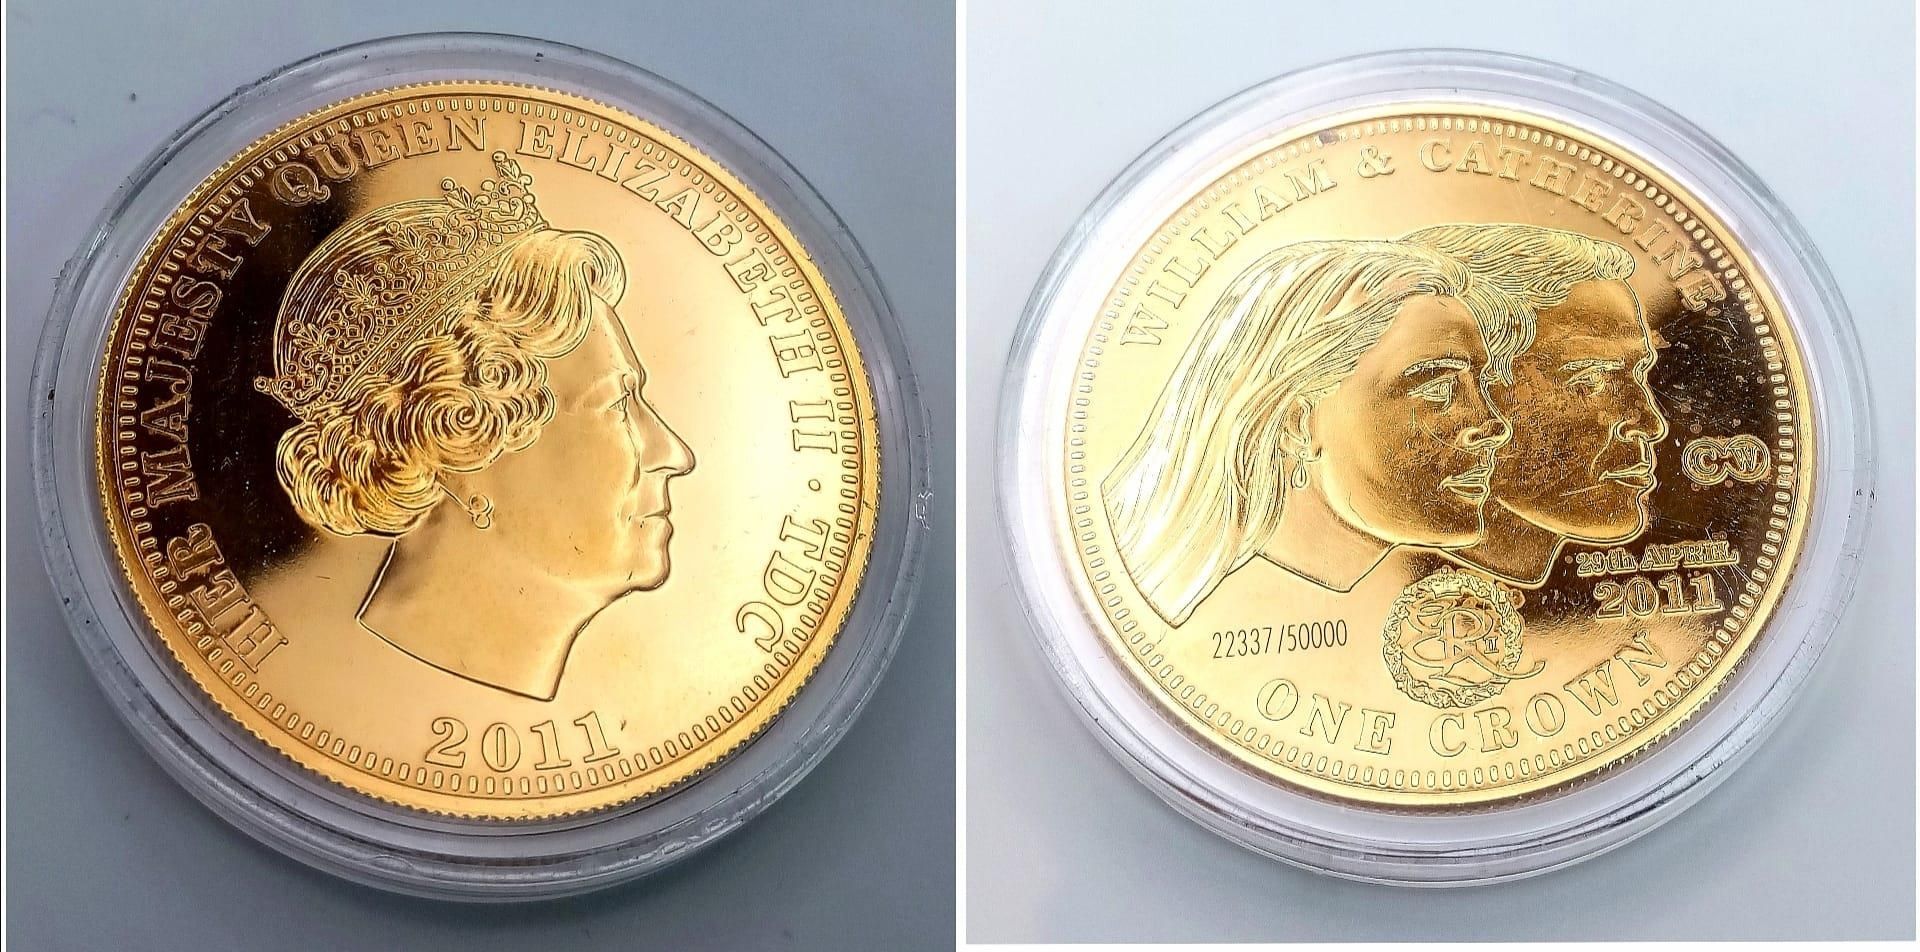 A 2011 William and Kate Gilt Proof Crown Coin.